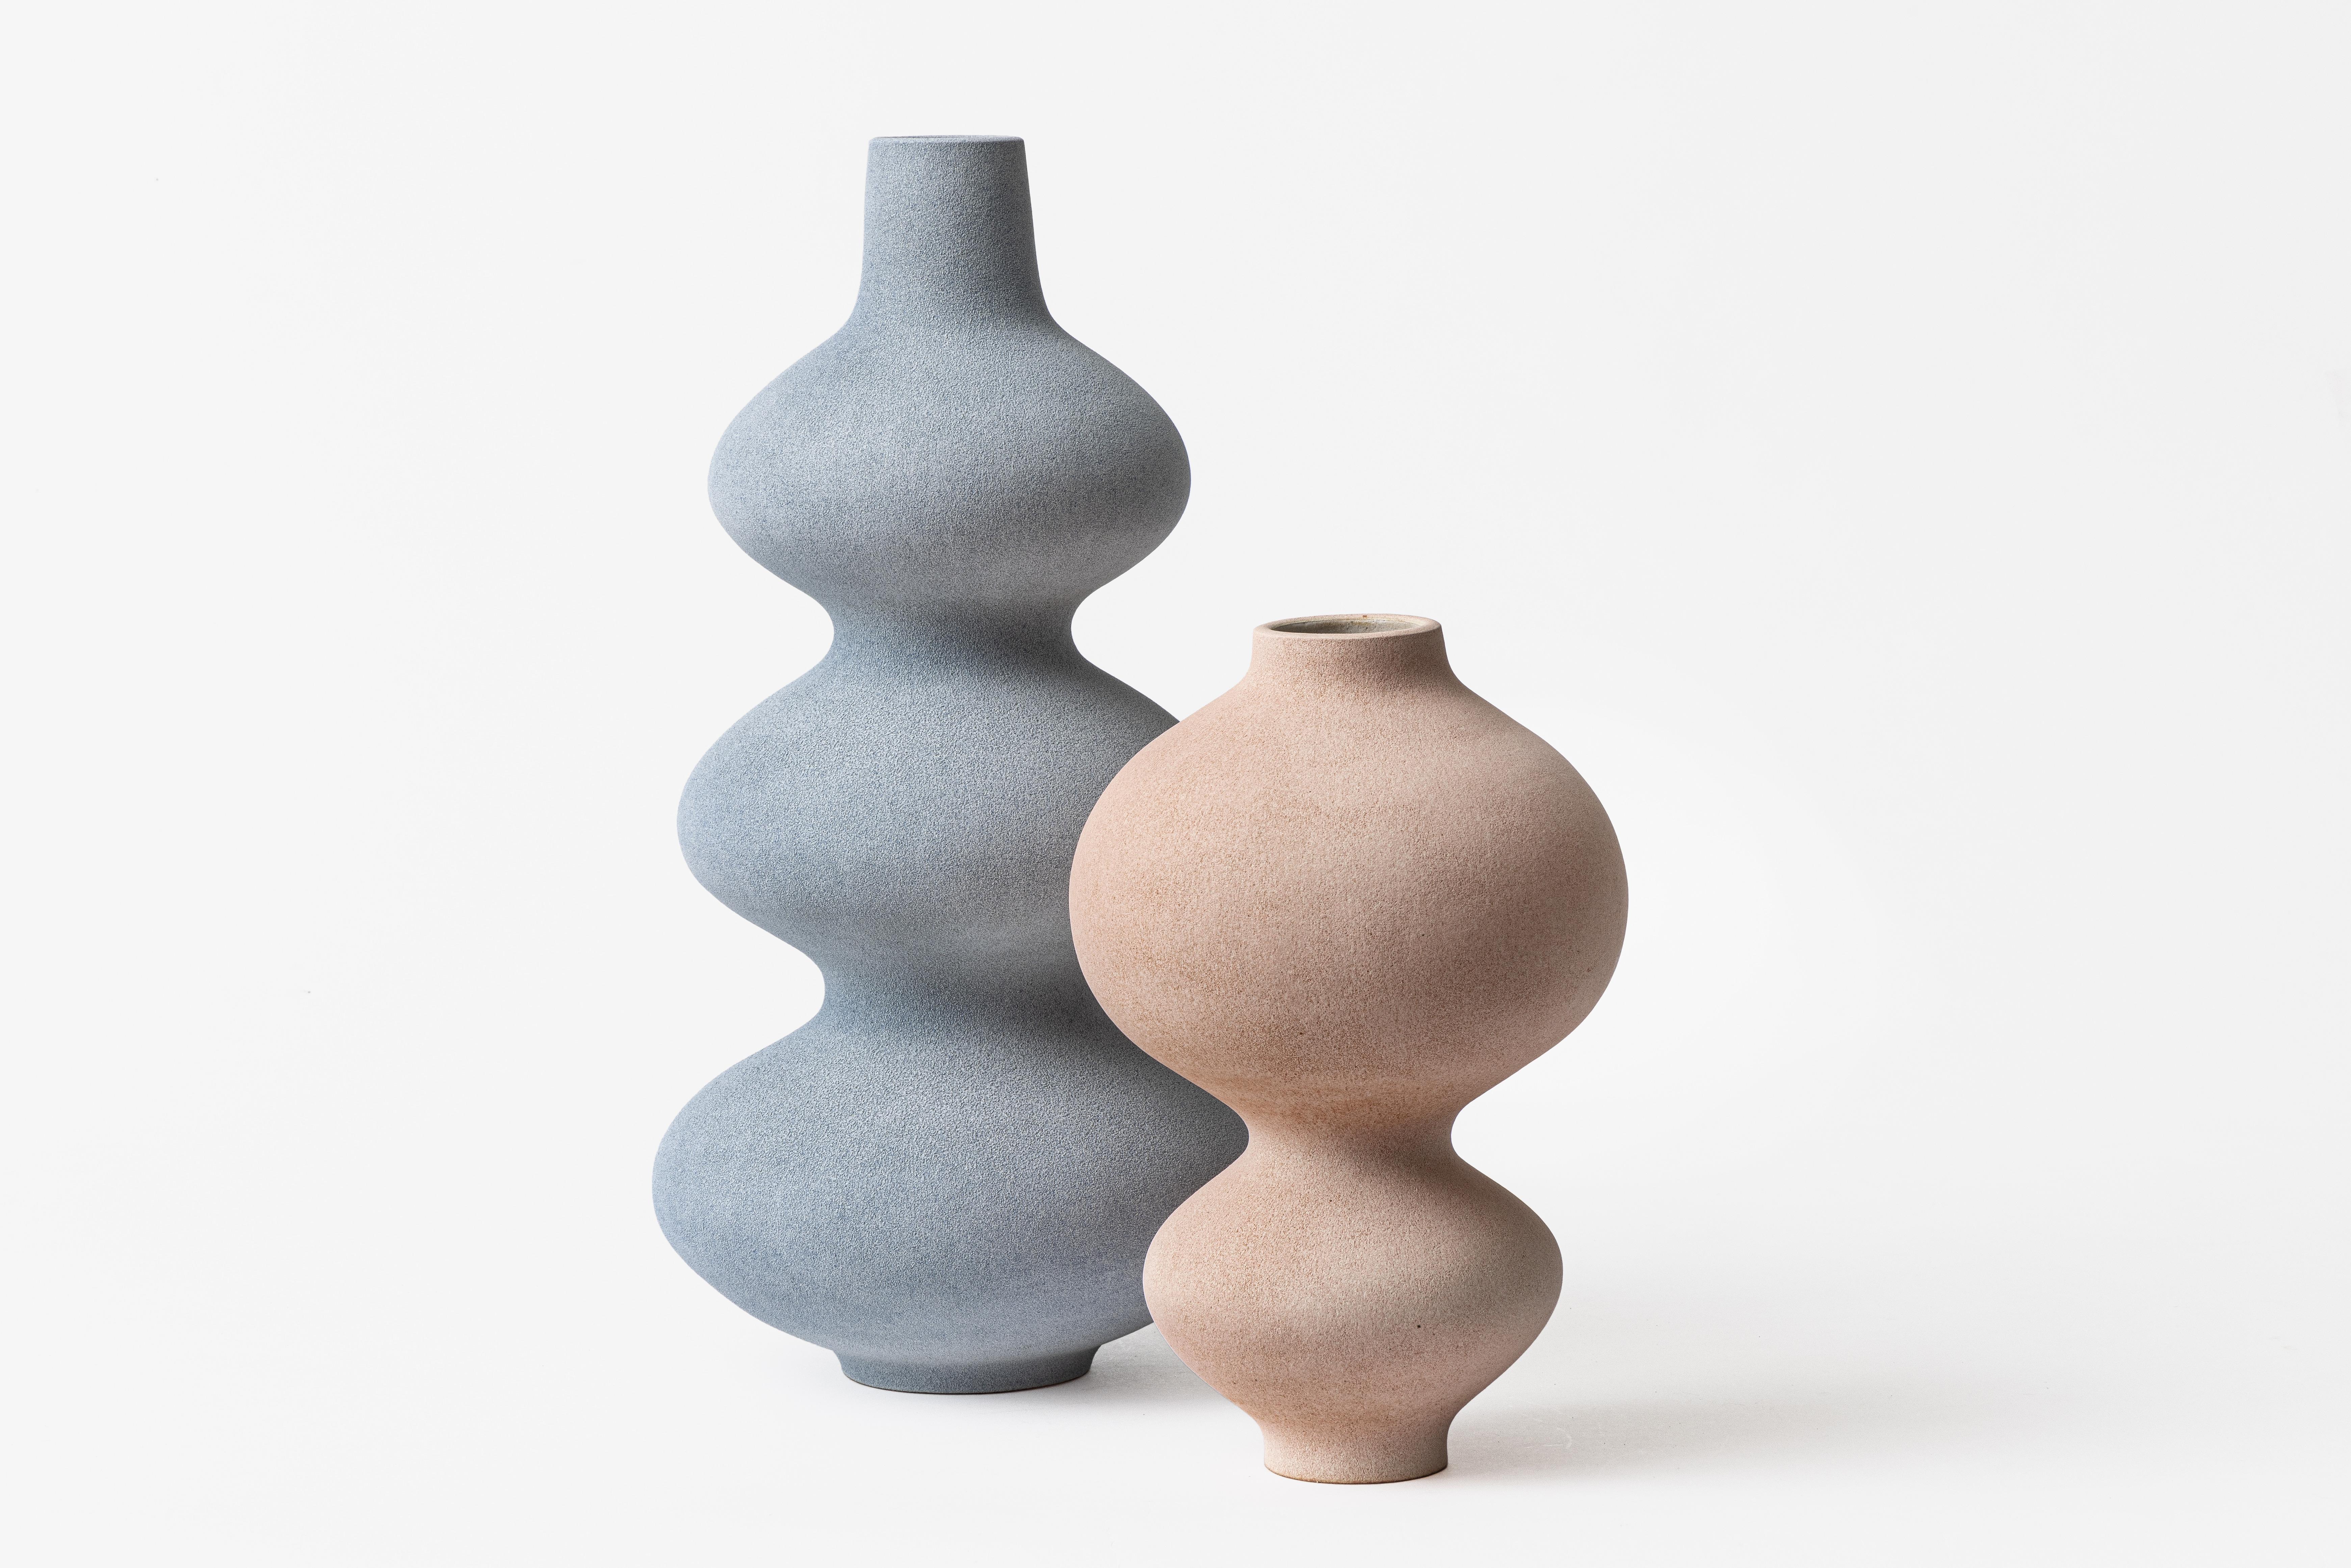 Baluster Vase I, 2023, (Ceramic, C. 17.7 in. h x 8.2 in. w x 8.2 in. d, Object No.: 4148)

Heisselberg Pedersen’s sculptures are hand-modeled from stoneware and glazed with slip-glazes, which give the works a stone-like, dry surface with a rich